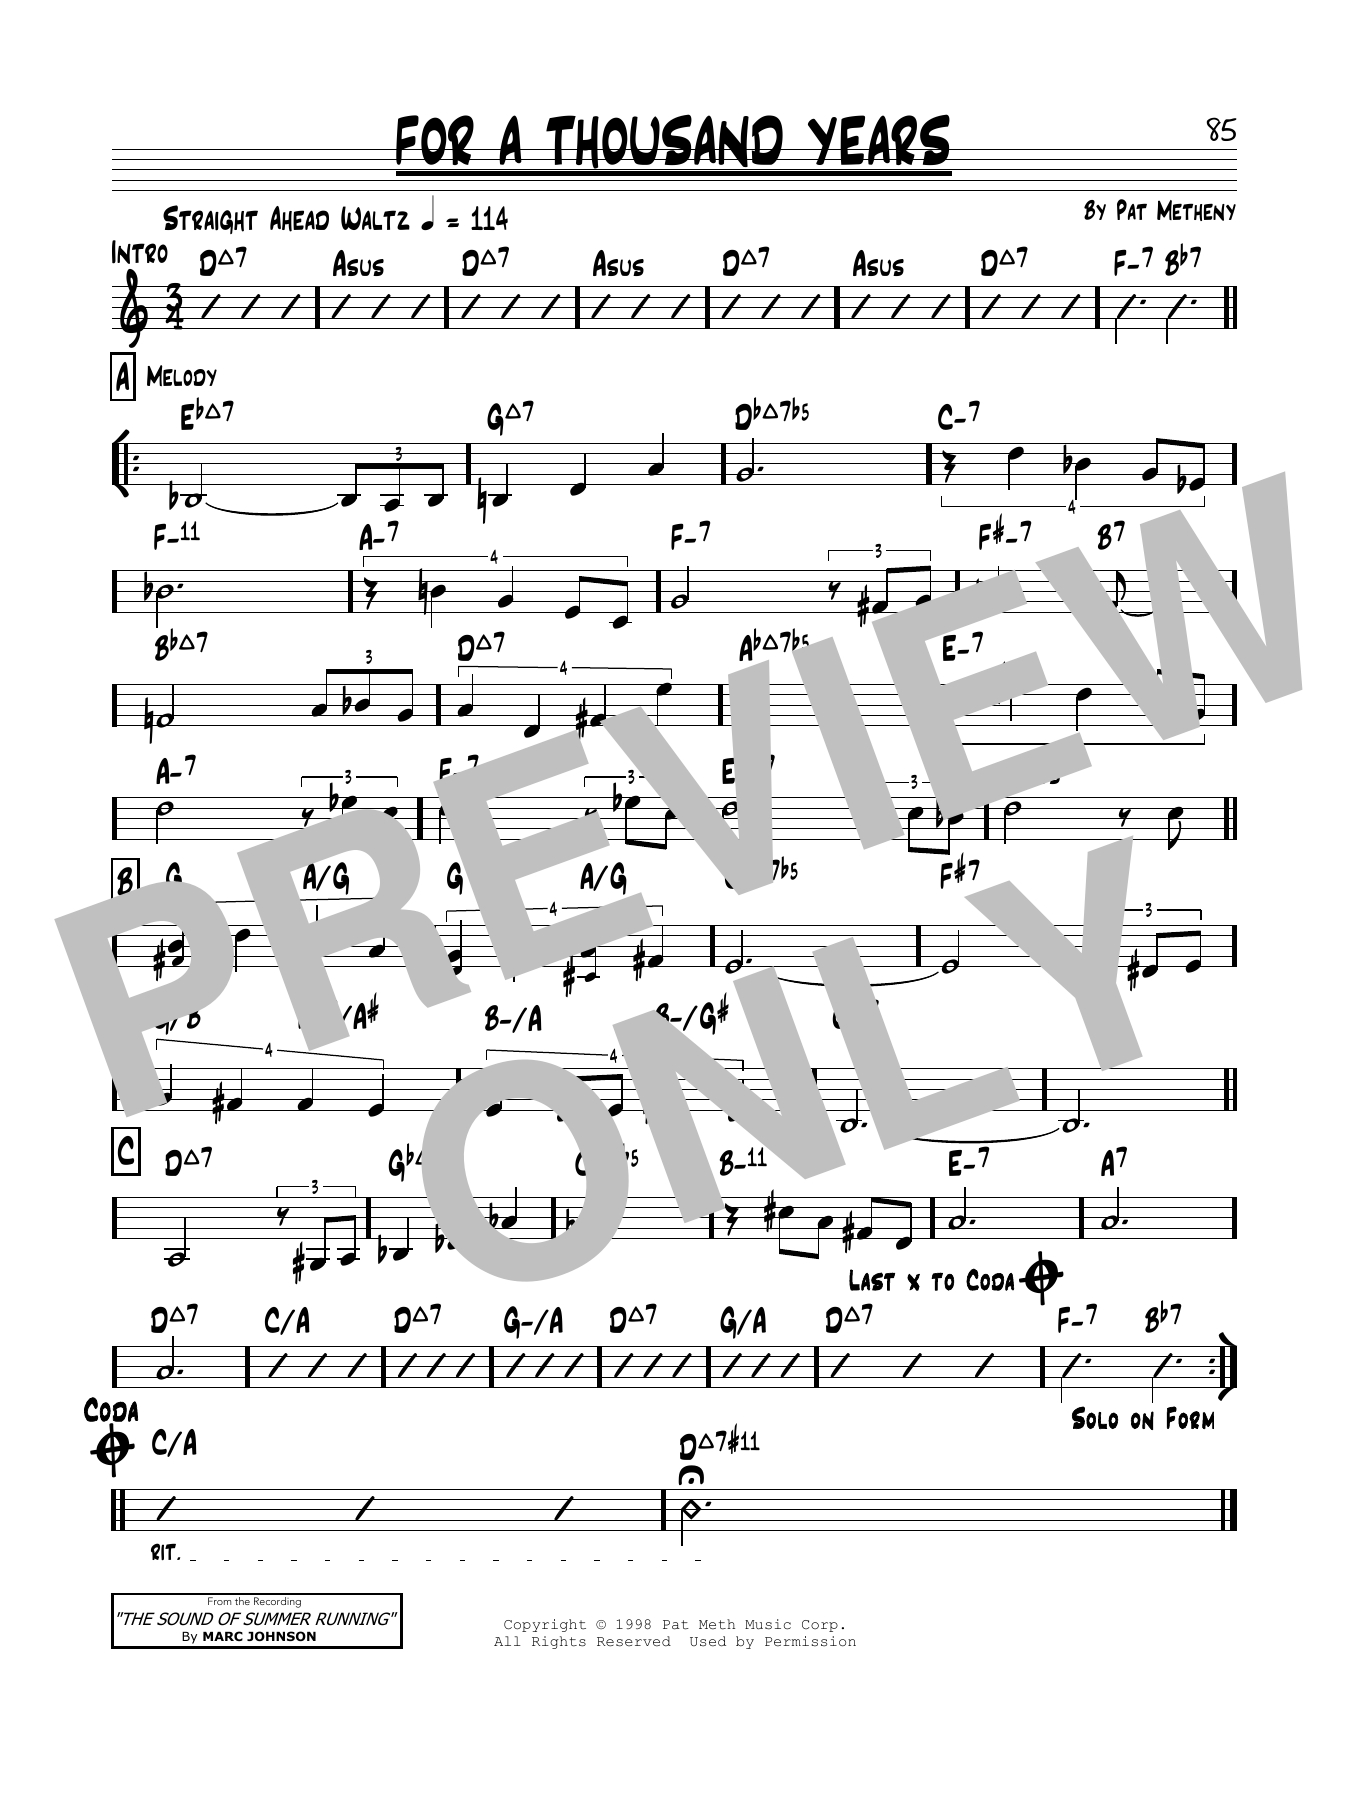 A Thousand Years Chords For A Thousand Years Pat Metheny Real Book Melody Chords Digital Sheet Music